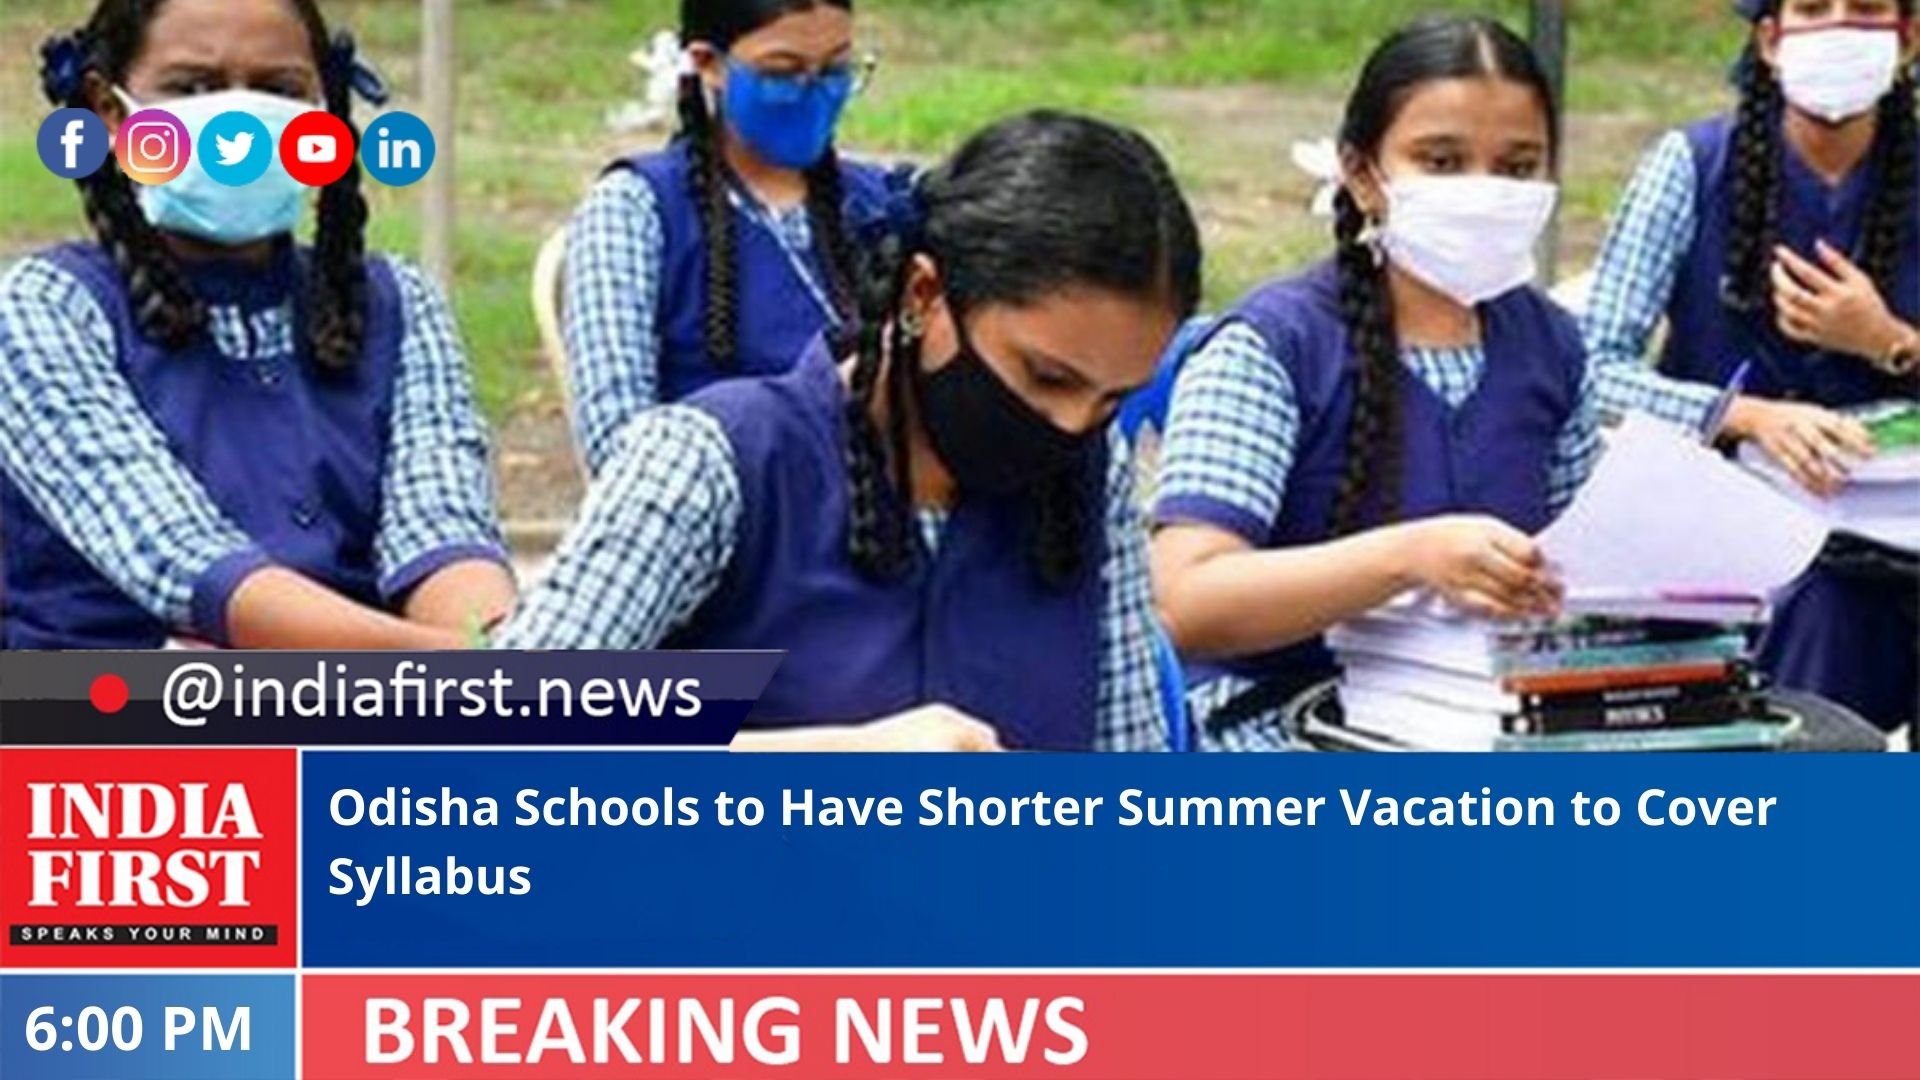 Odisha Schools to Have Shorter Summer Vacation to Cover Syllabus